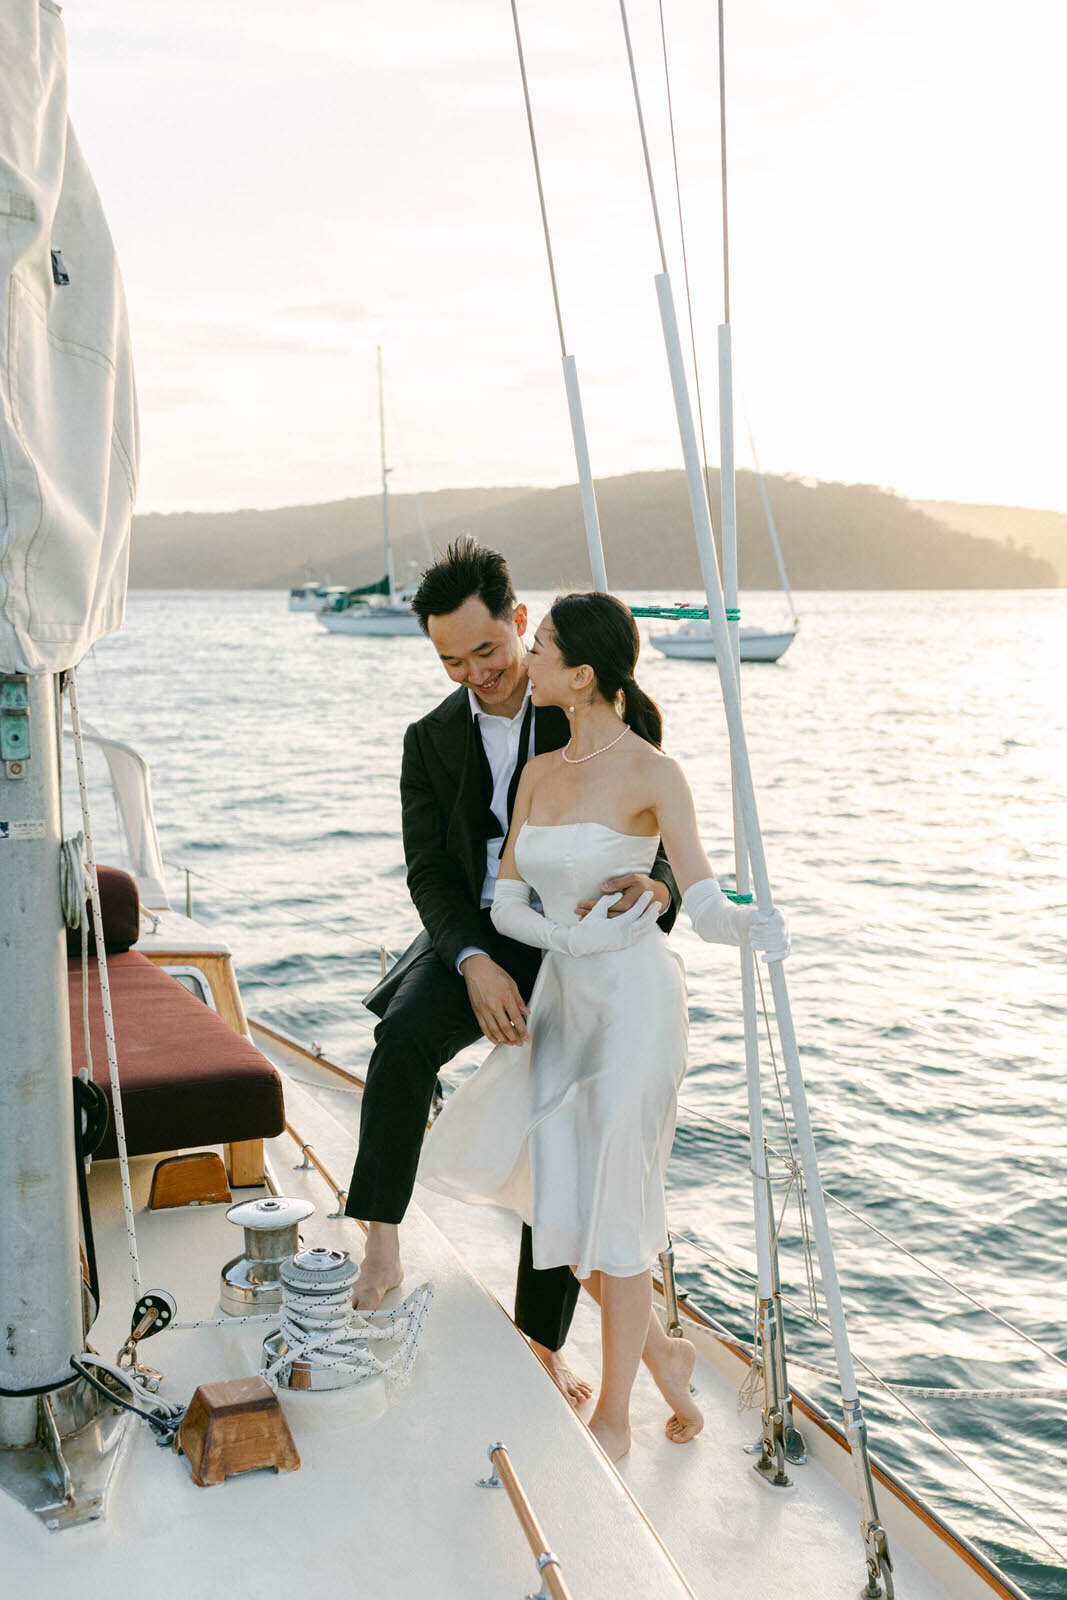 Engaged couple on a sailboat